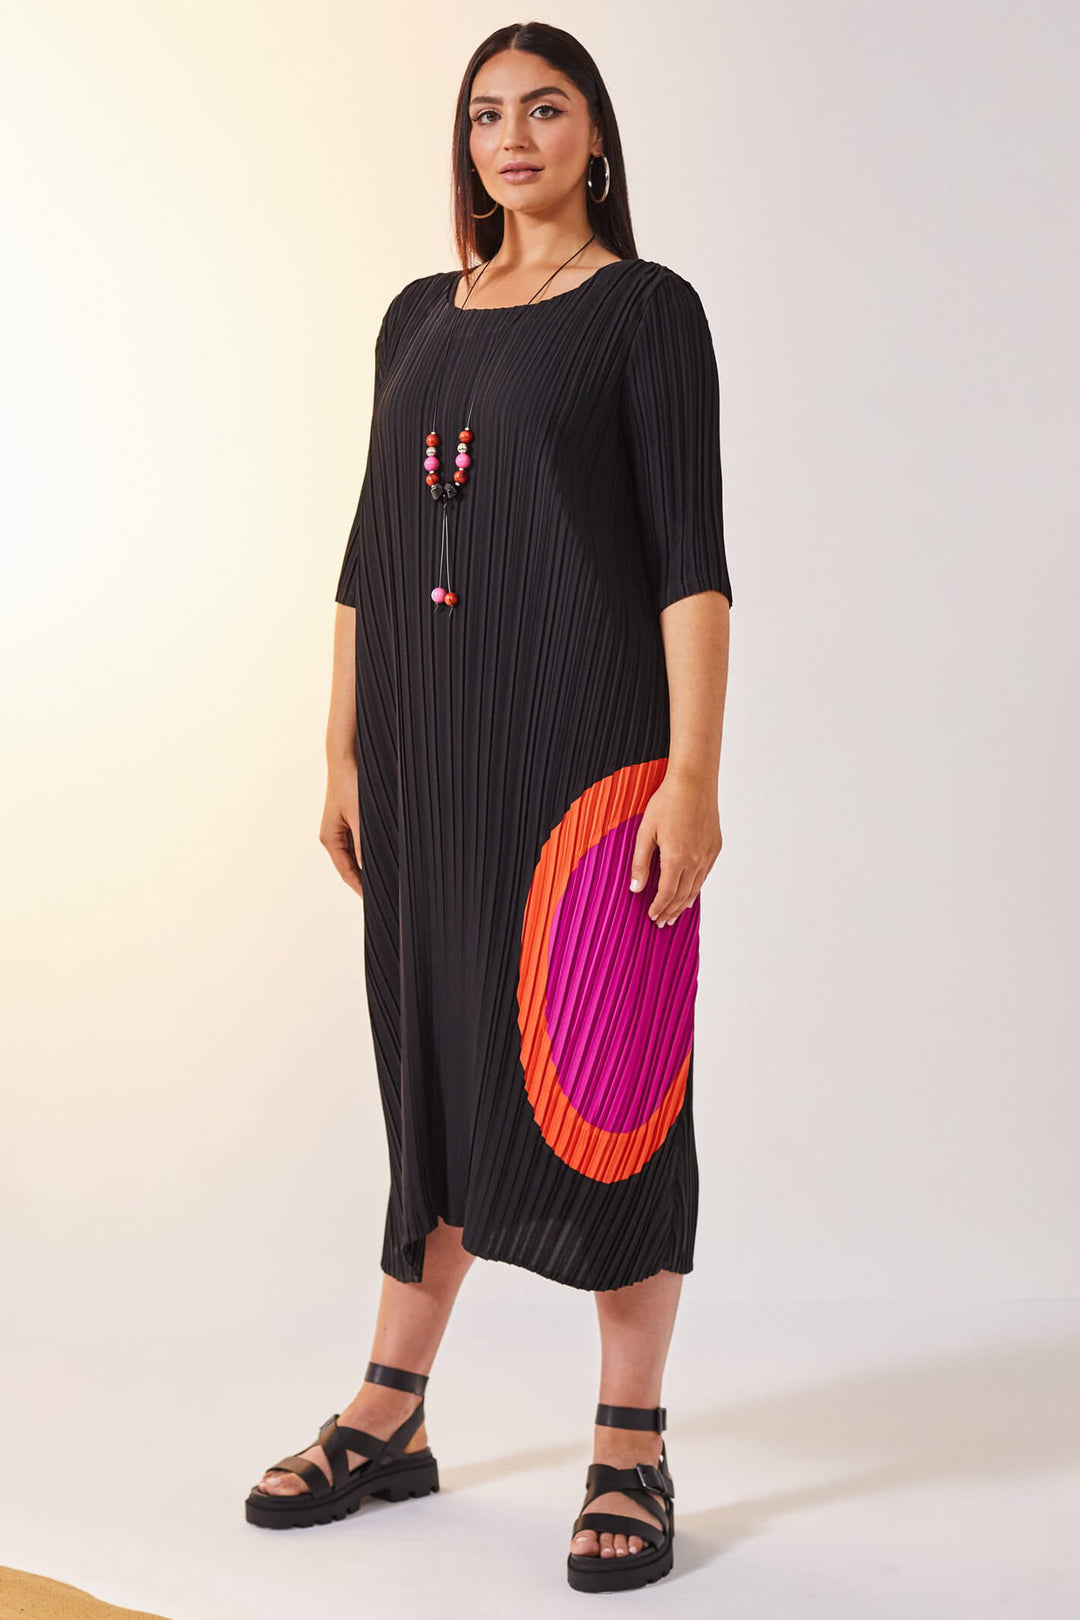 Ora ORS23 109 Black & Pink Pleated Dress With Necklace - Experience Boutique